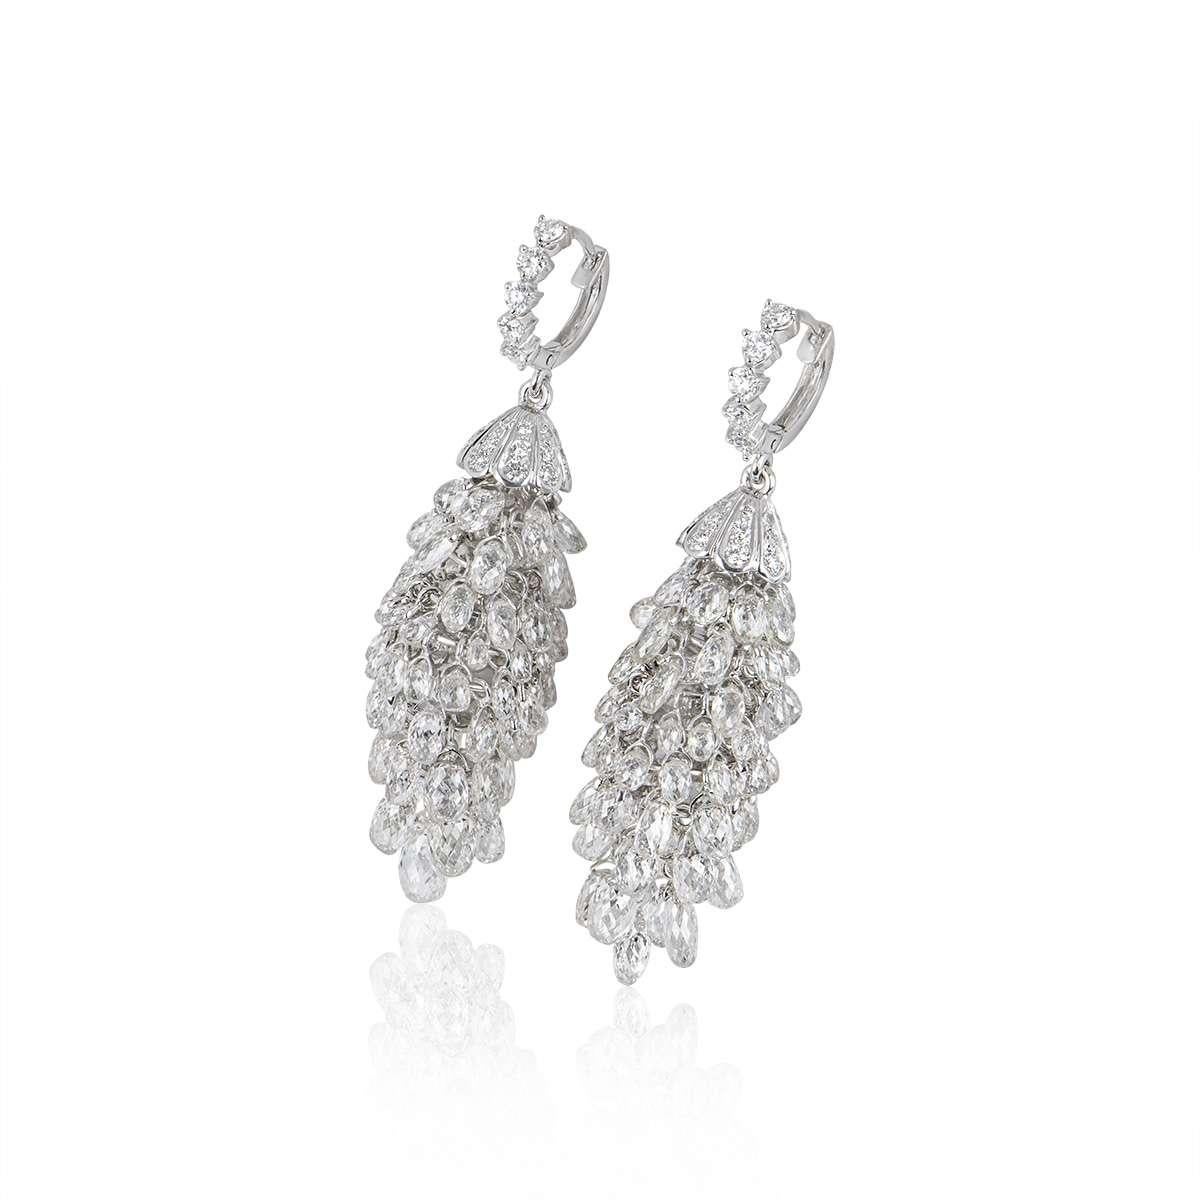 White Gold Diamond Briolette Chandelier Earrings 34.78 Carat In New Condition For Sale In London, GB